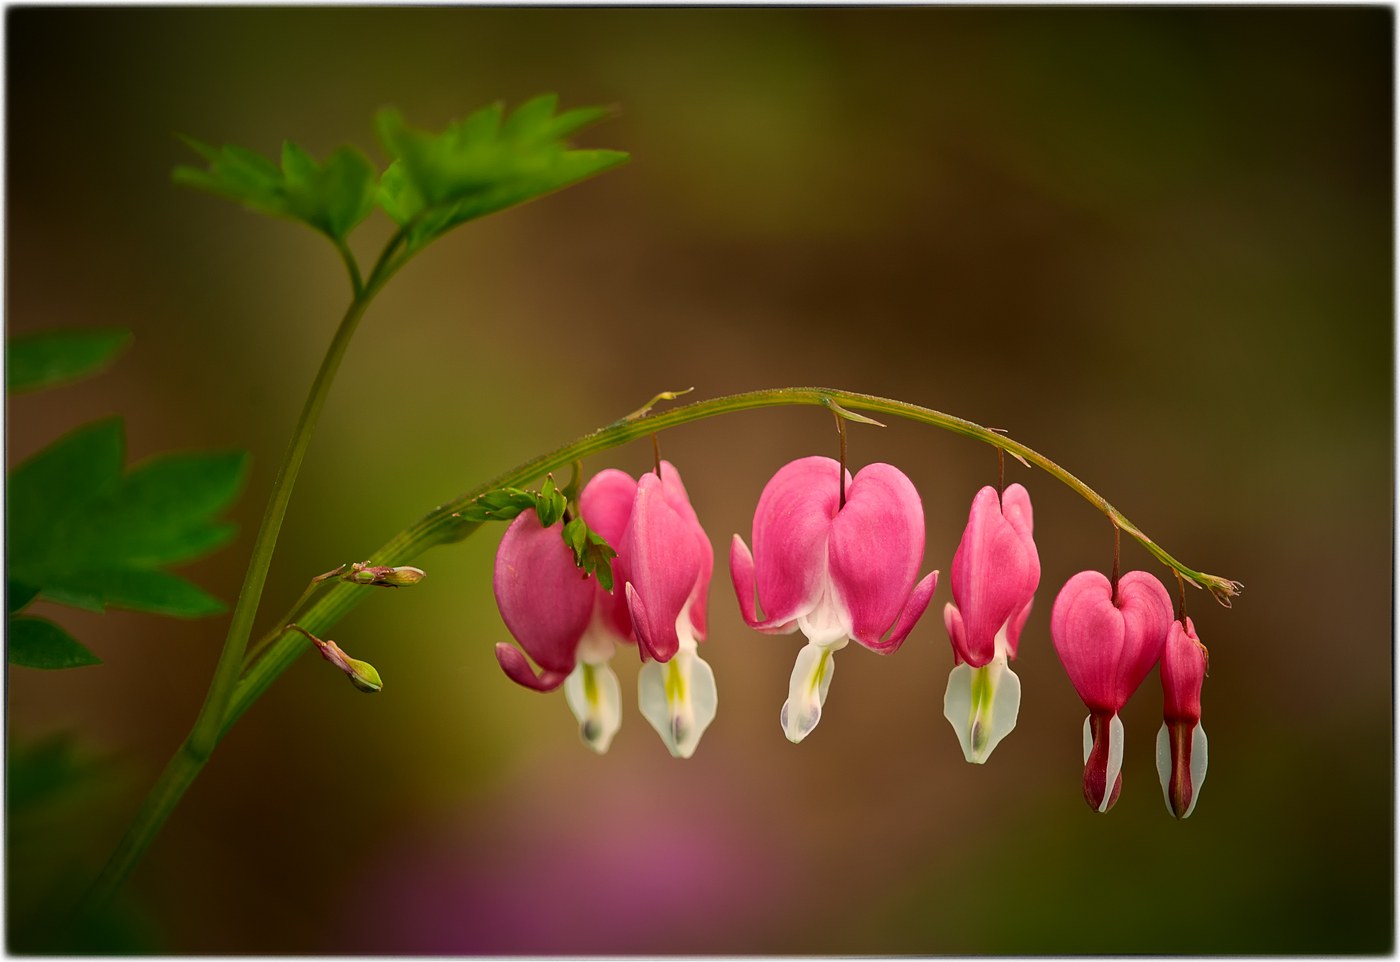 Bleeding Heart by Dick States